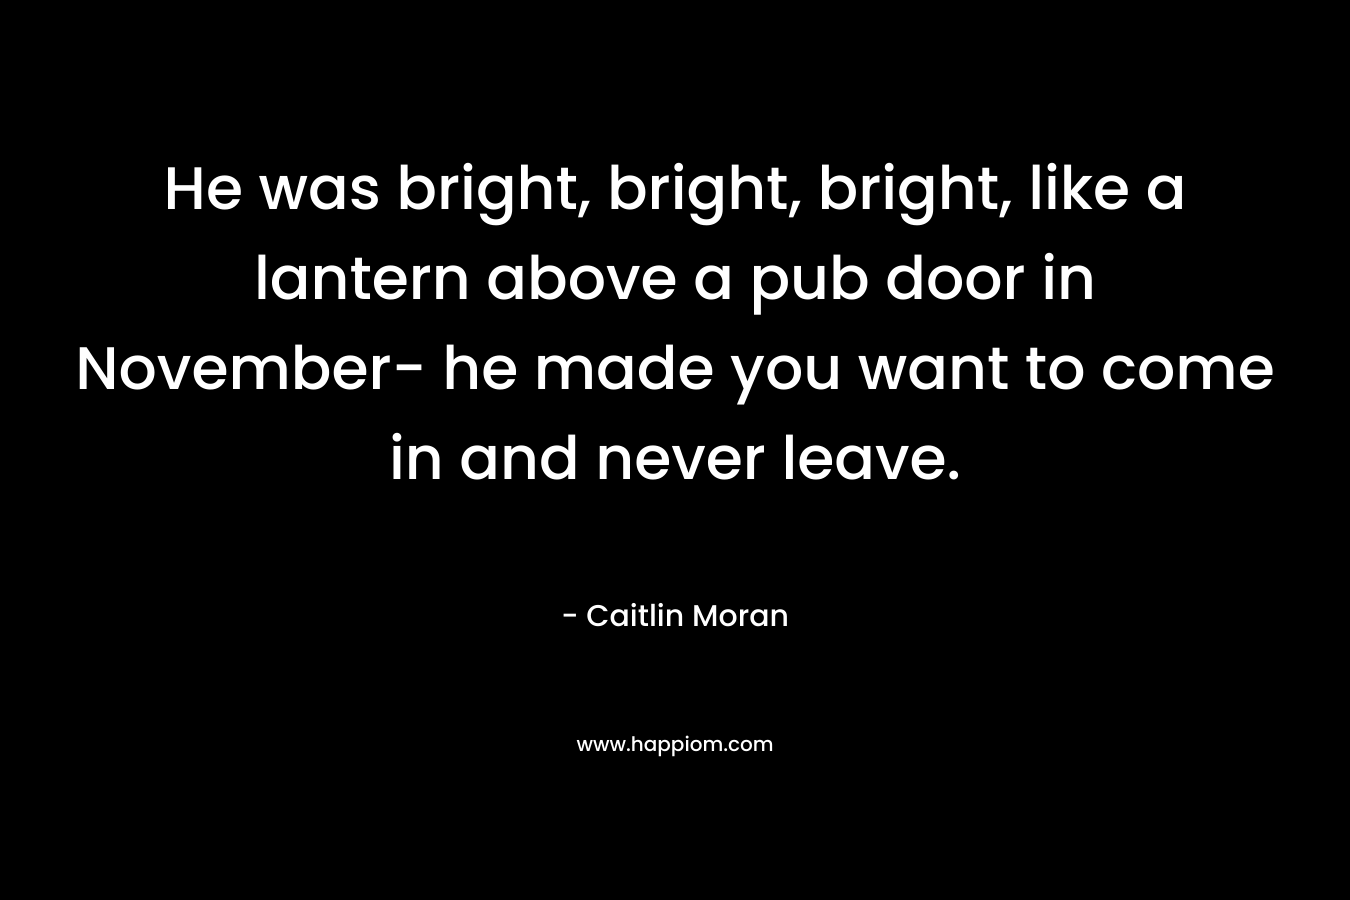 He was bright, bright, bright, like a lantern above a pub door in November- he made you want to come in and never leave. – Caitlin Moran